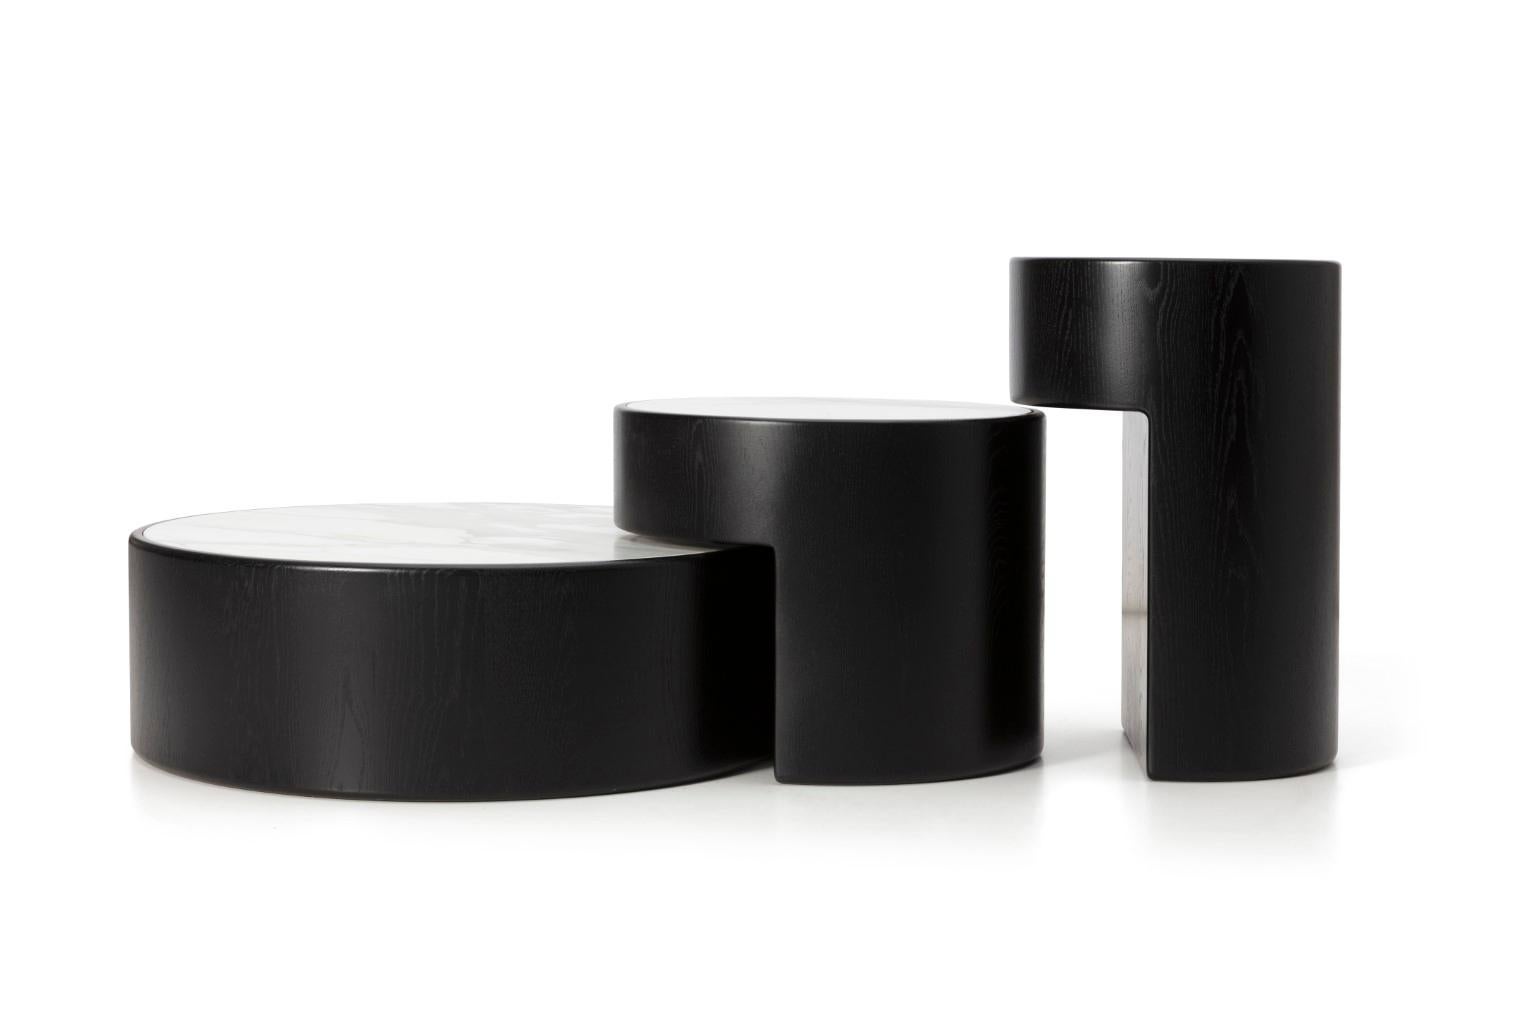 French Levels Set of 3 Nesting Tables by Dan Yeffet & Lucie Koldova